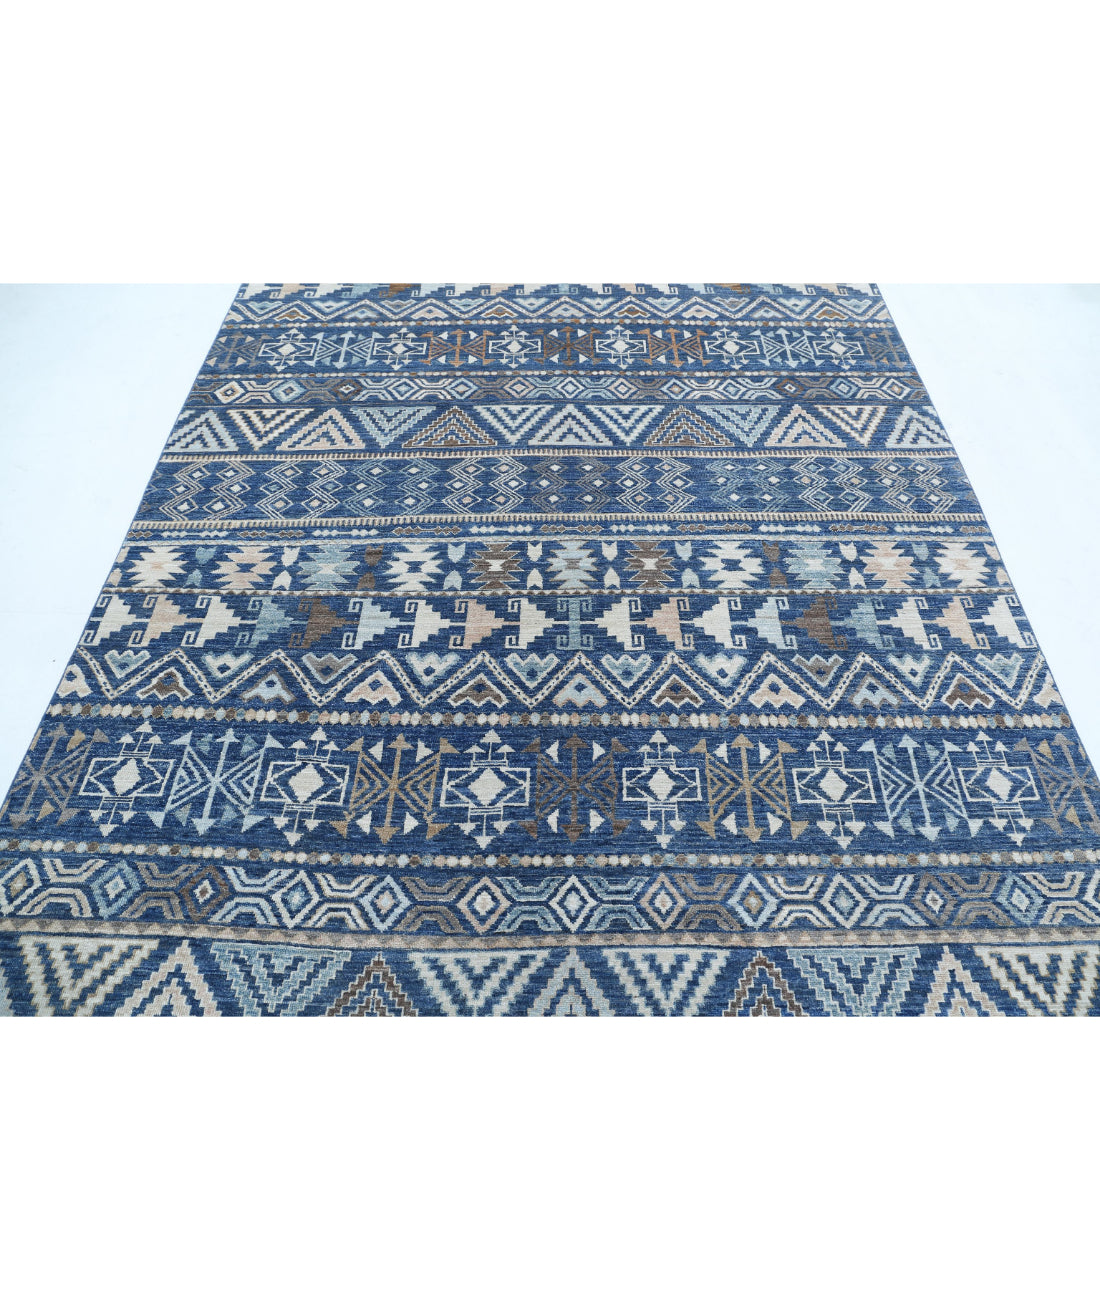 Hand Knotted Khurjeen Wool Rug - 6'9'' x 8'5'' 6'9'' x 8'5'' (203 X 253) / Blue / Ivory